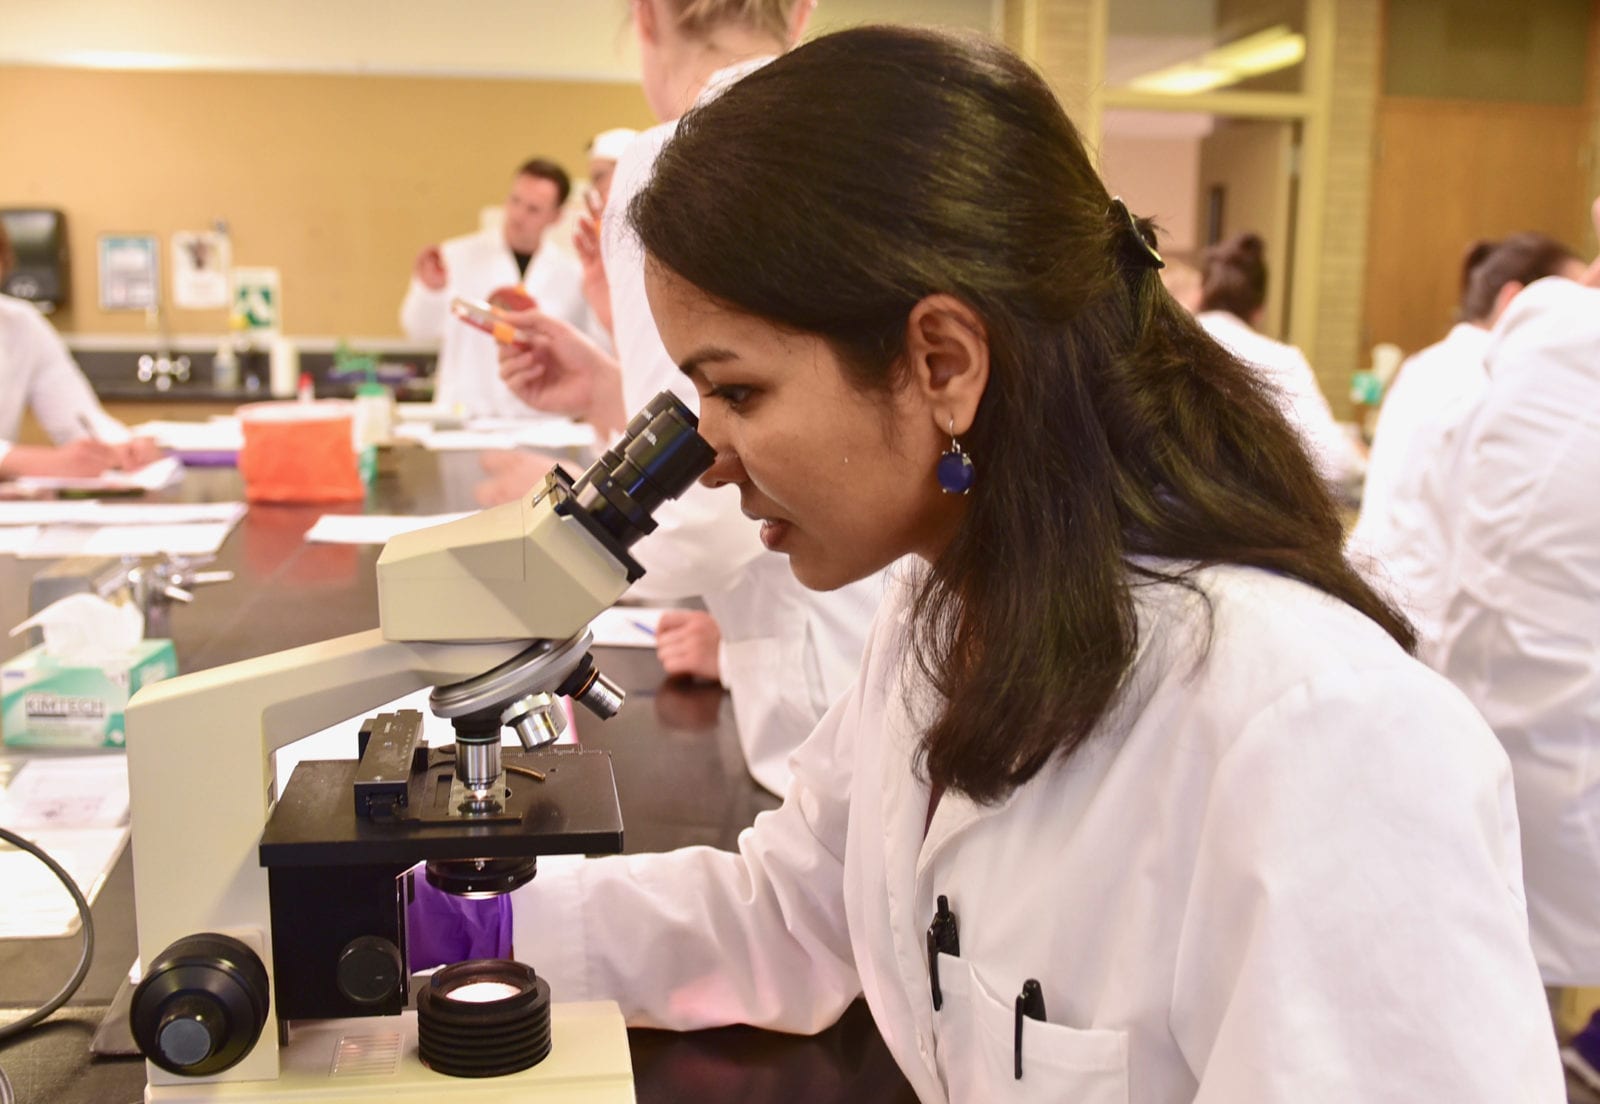 Working as a medical laboratory scientist requires a bachelor’s degree.